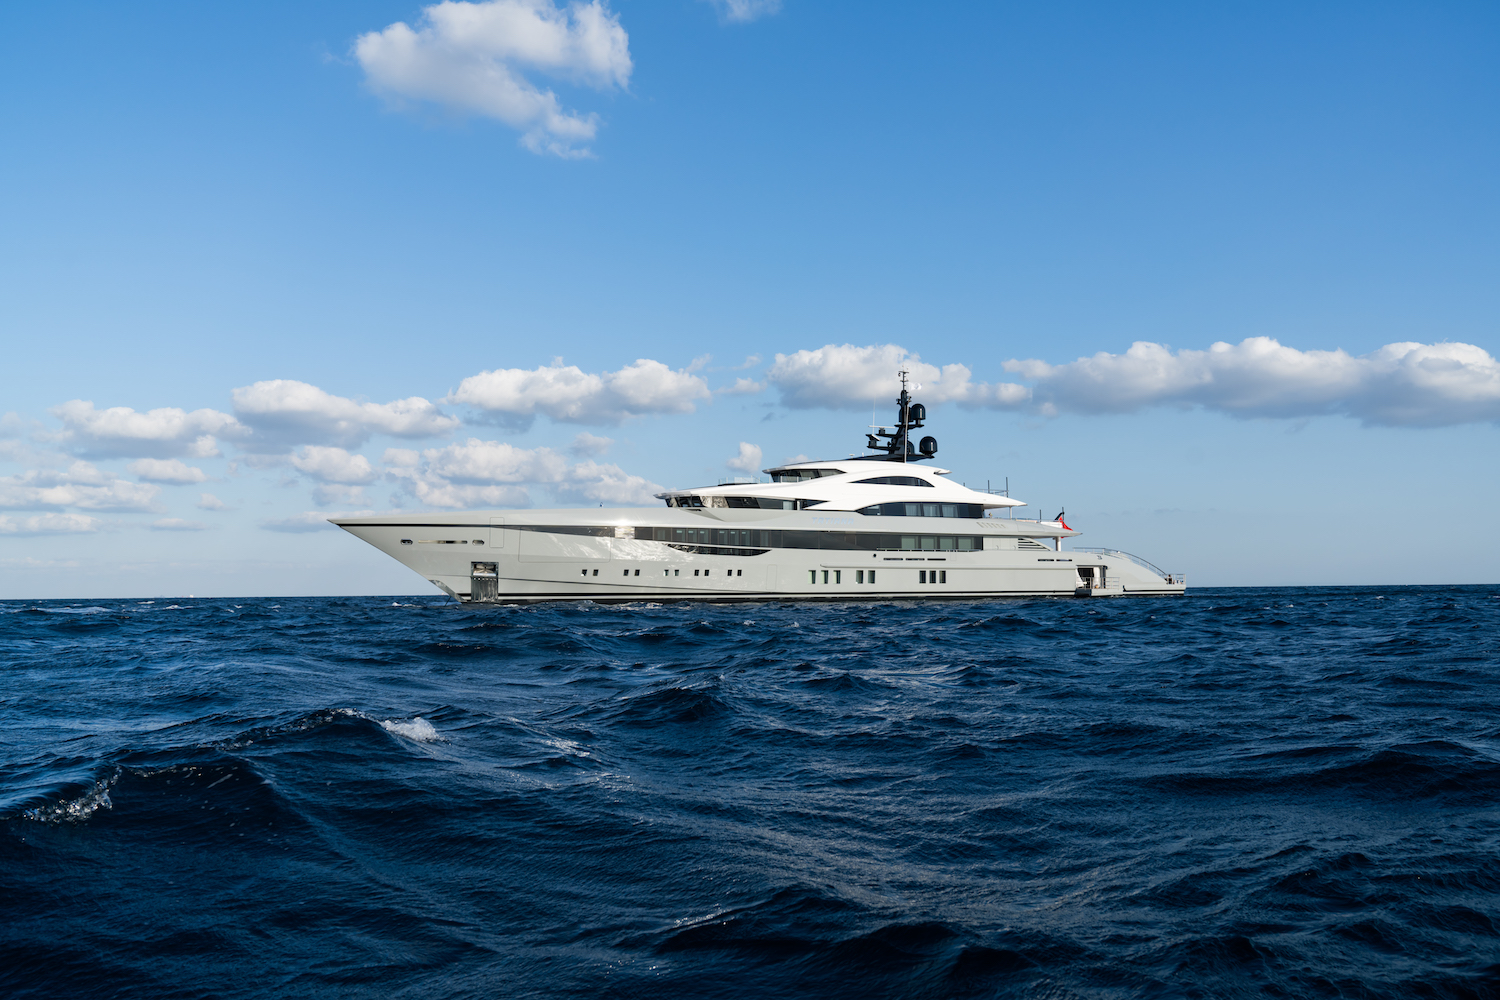 Profile Of The Superyacht